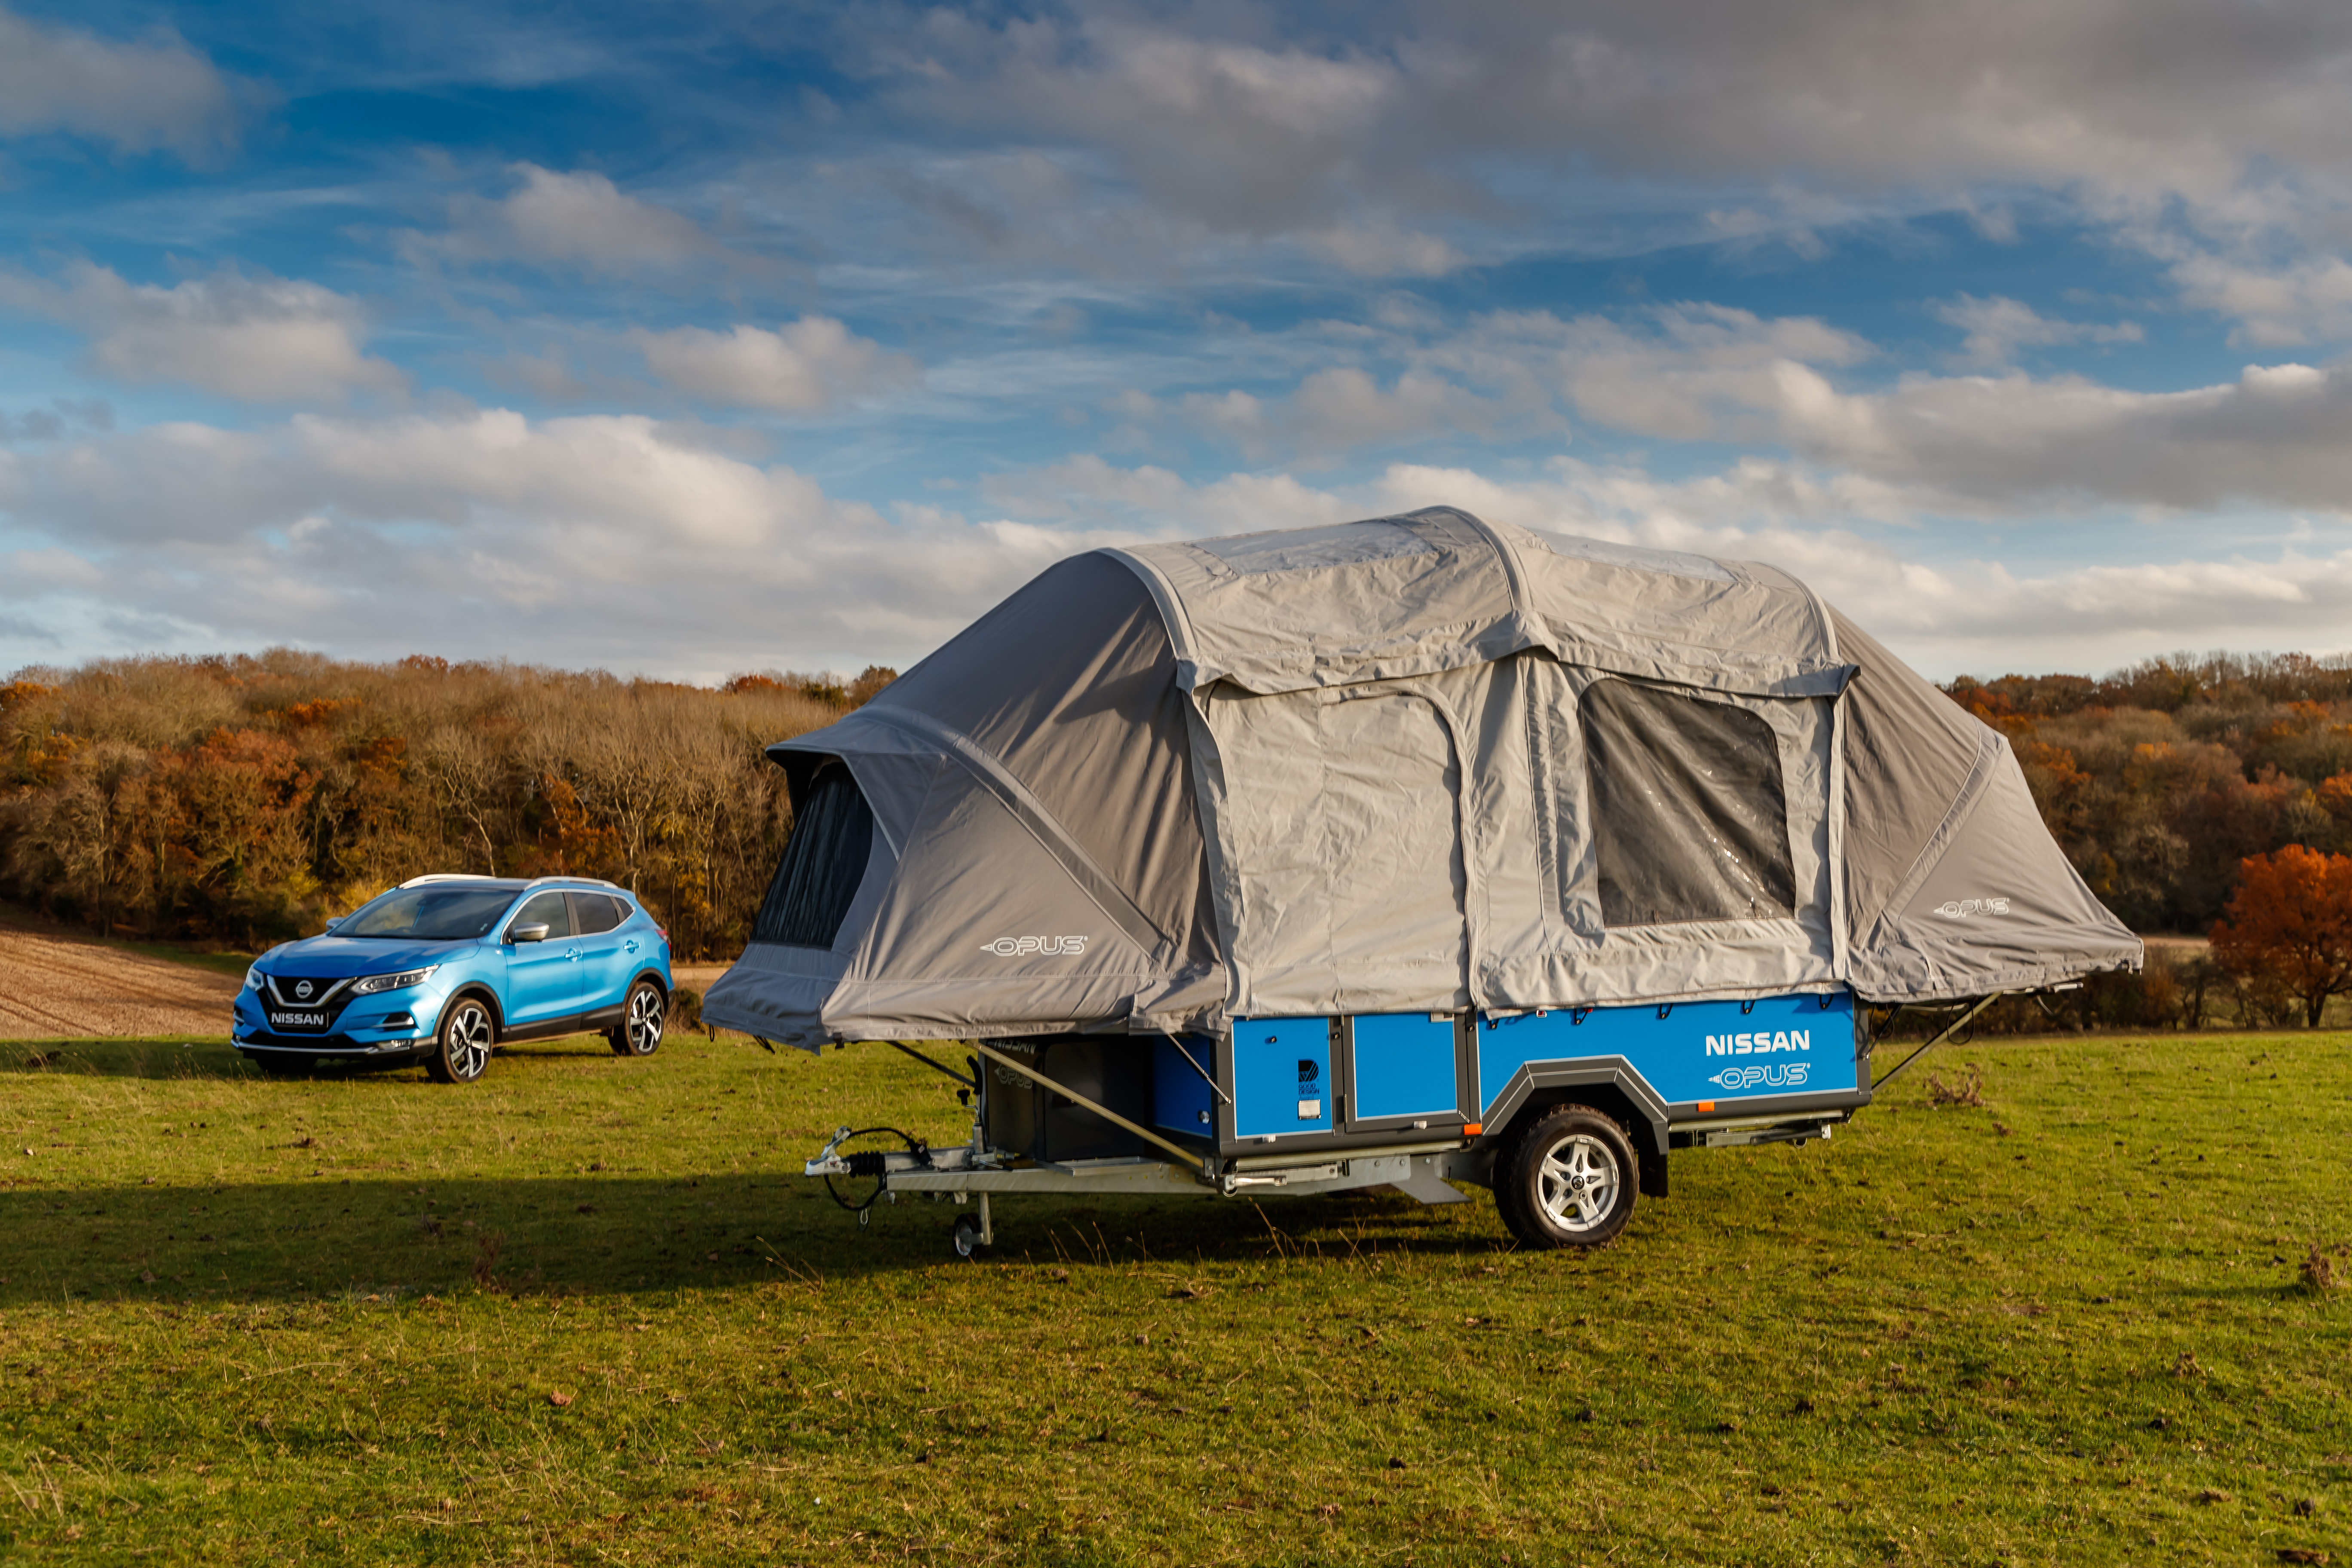 Nissan S Old Leaf Batteries Can Power This Smart Pop Up Camper For